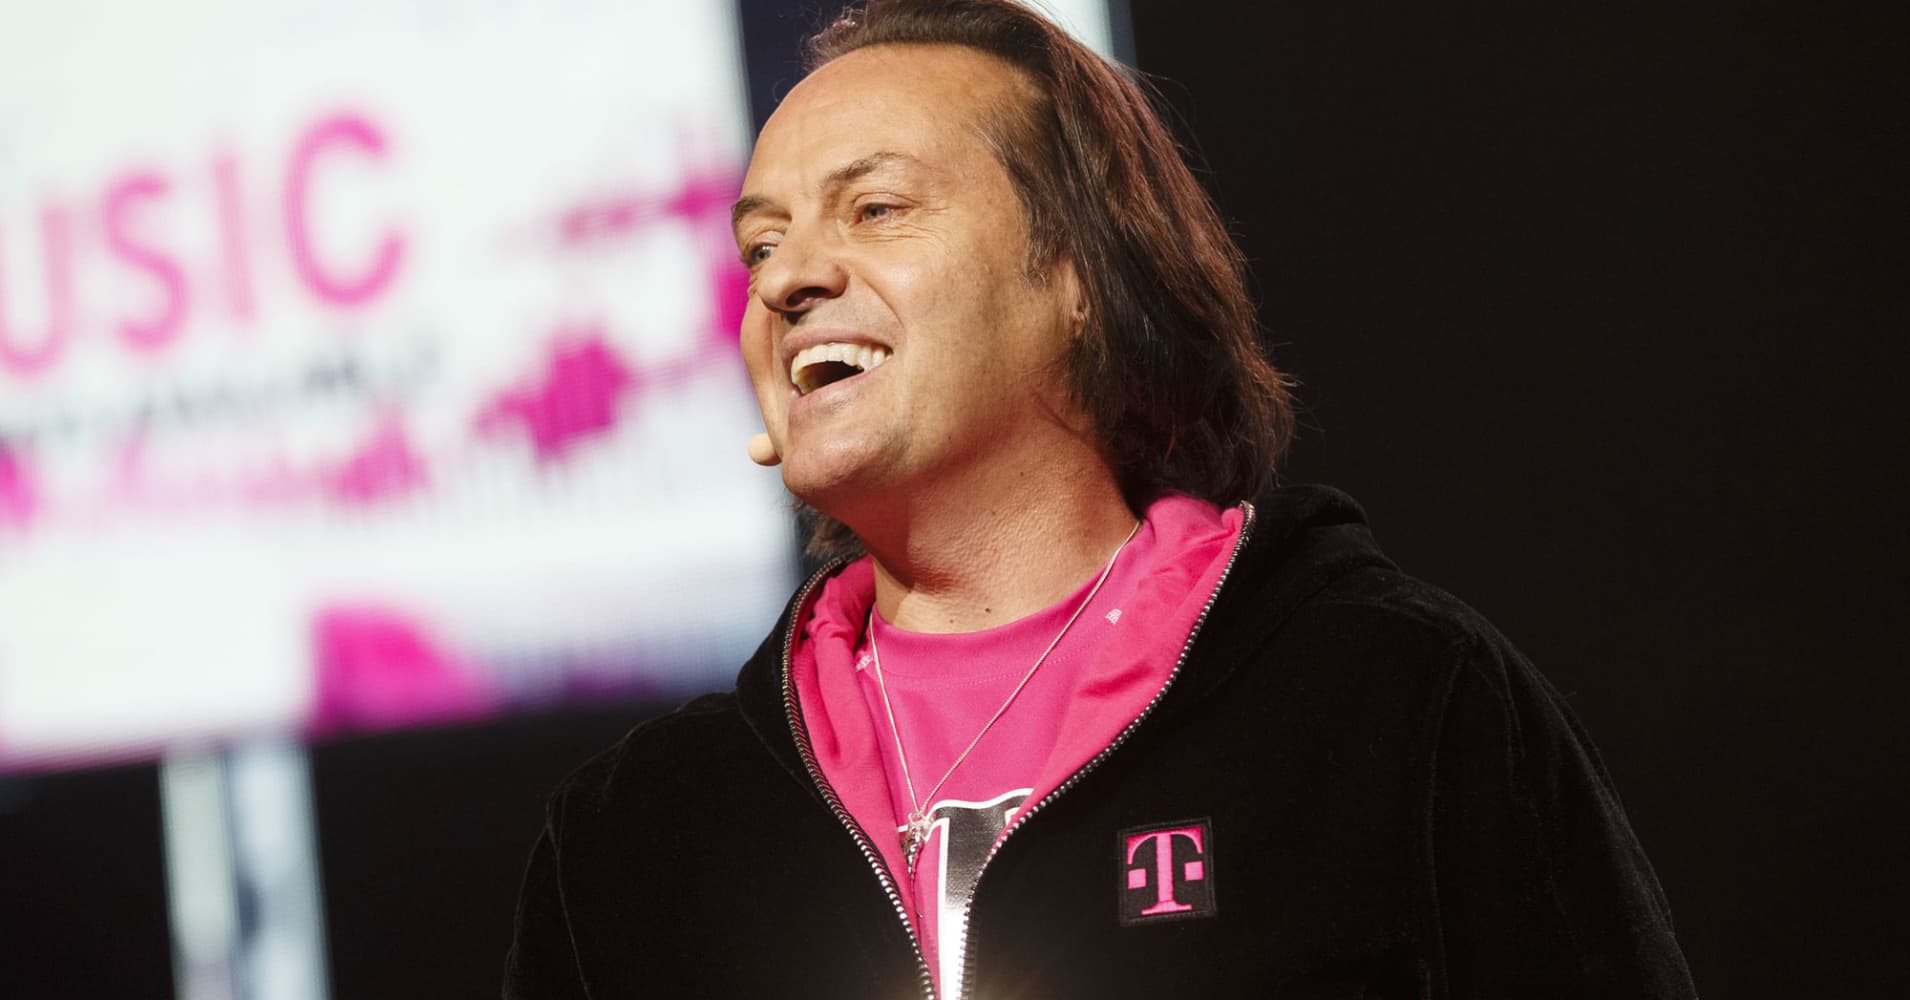 T-Mobile and Sprint stock-for-stock deal to reflect 'at market' price